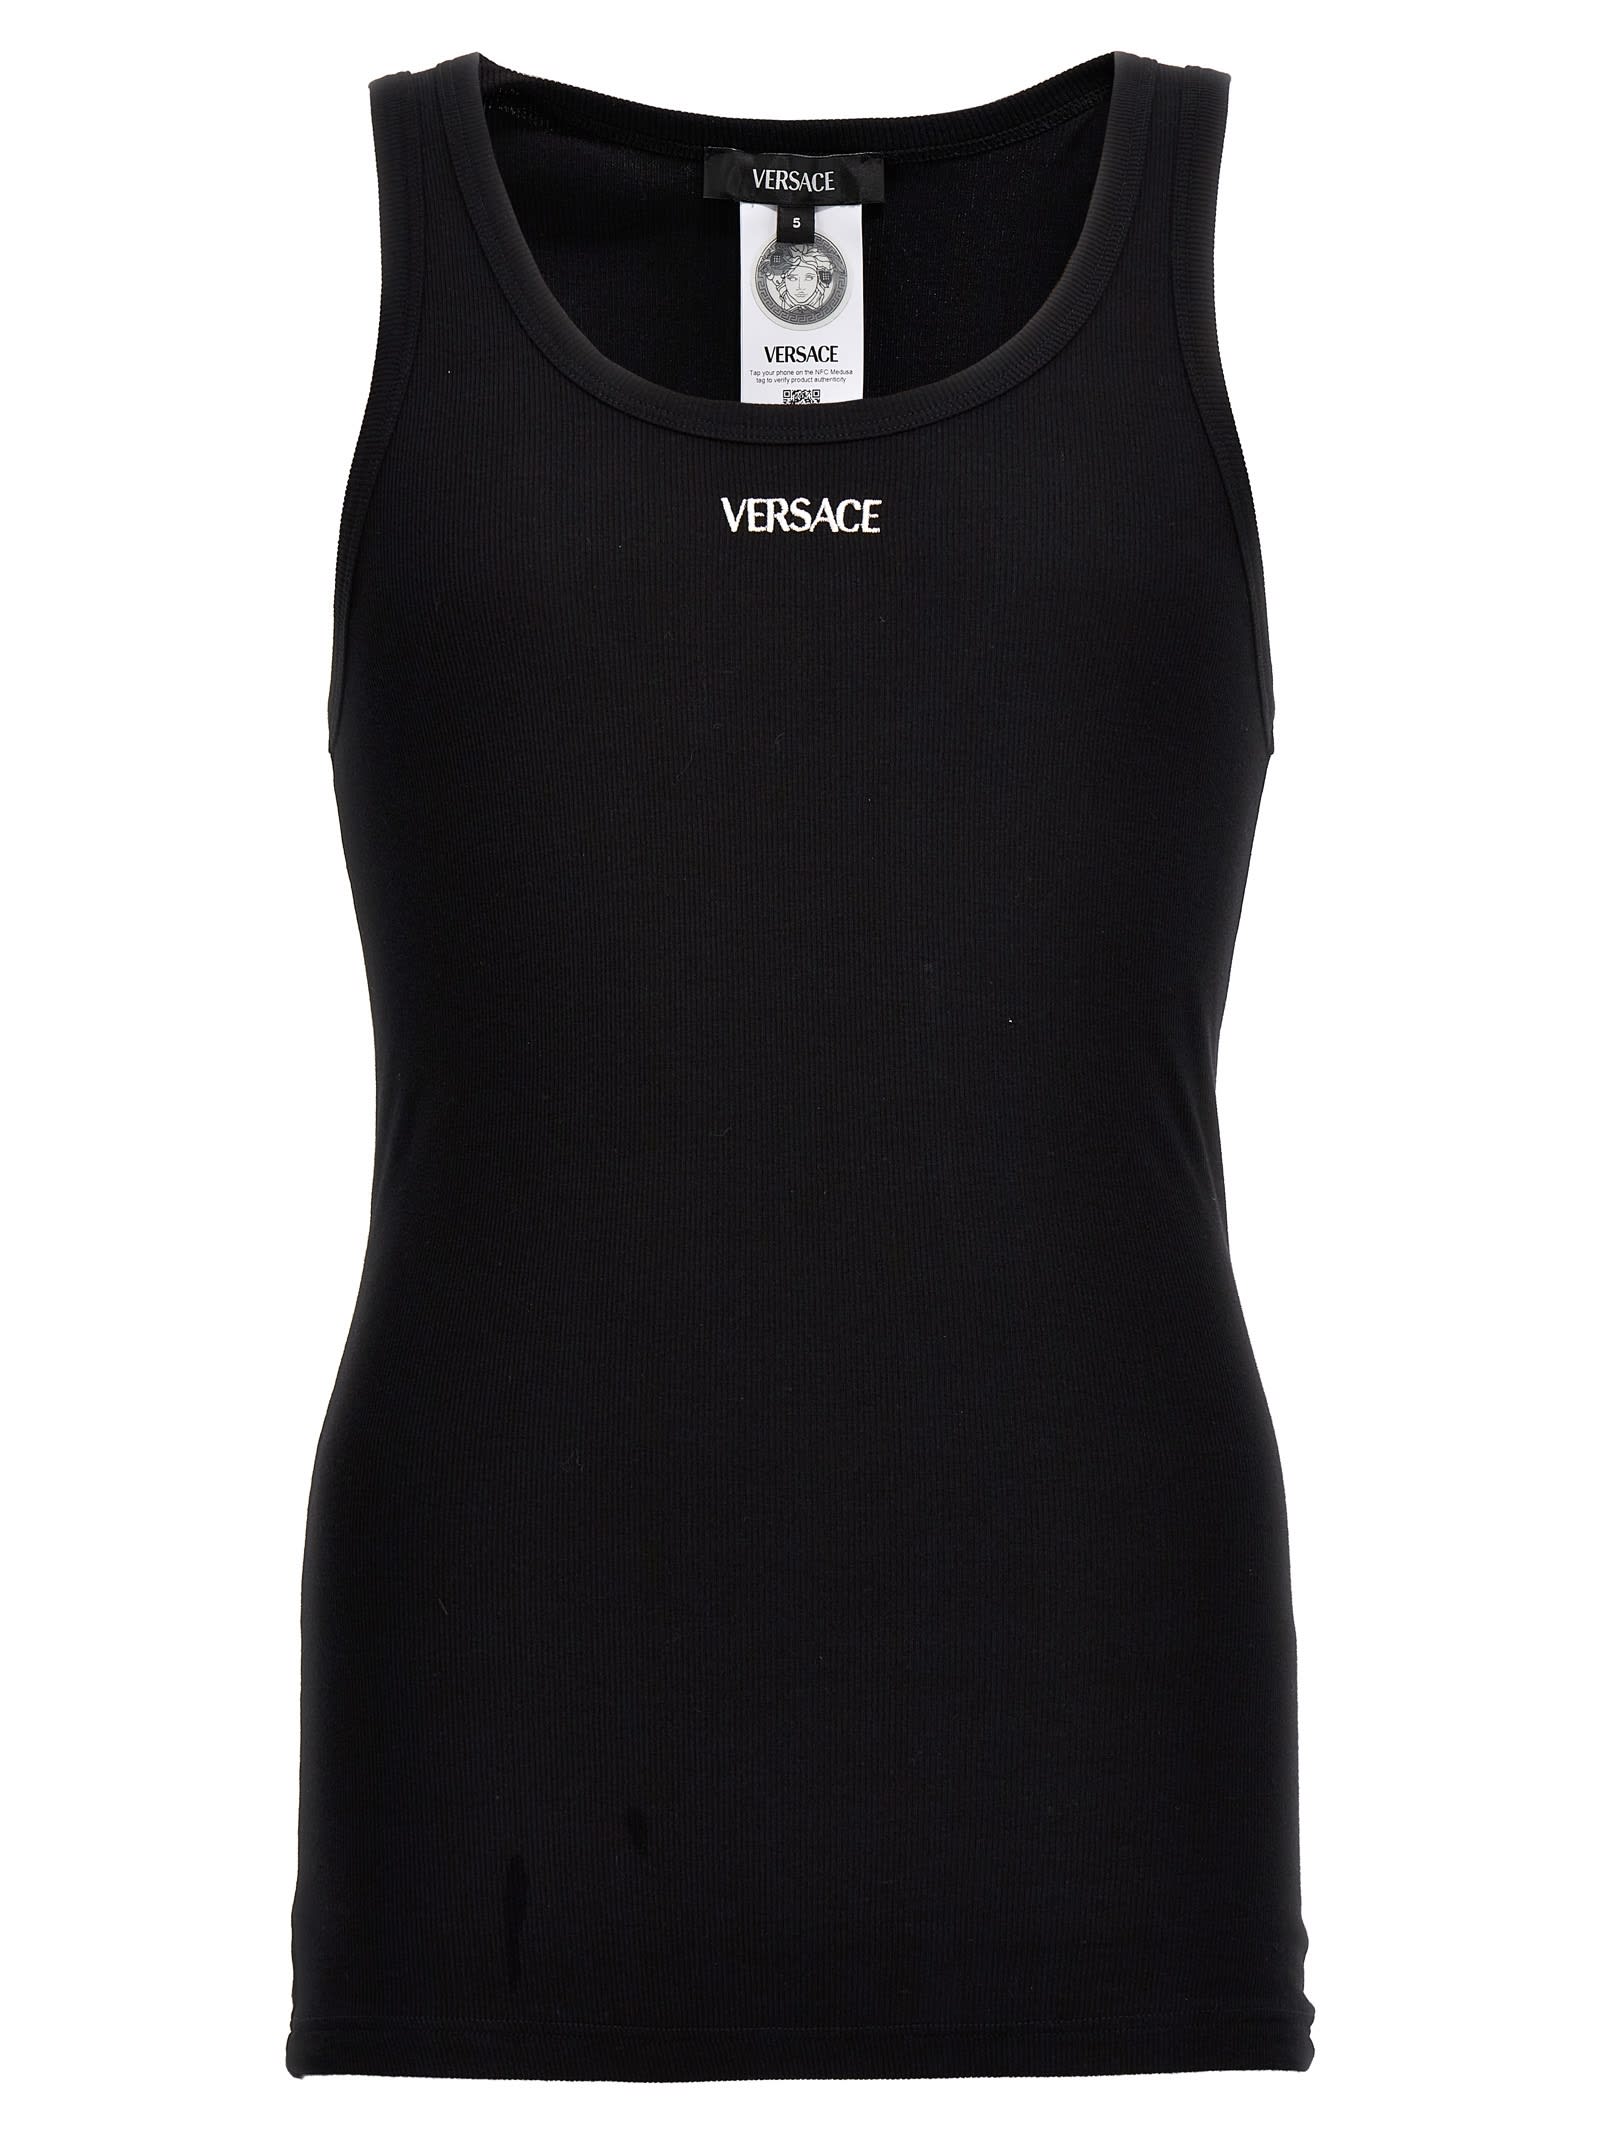 VERSACE LOGO EMBROIDERY TANK TOP